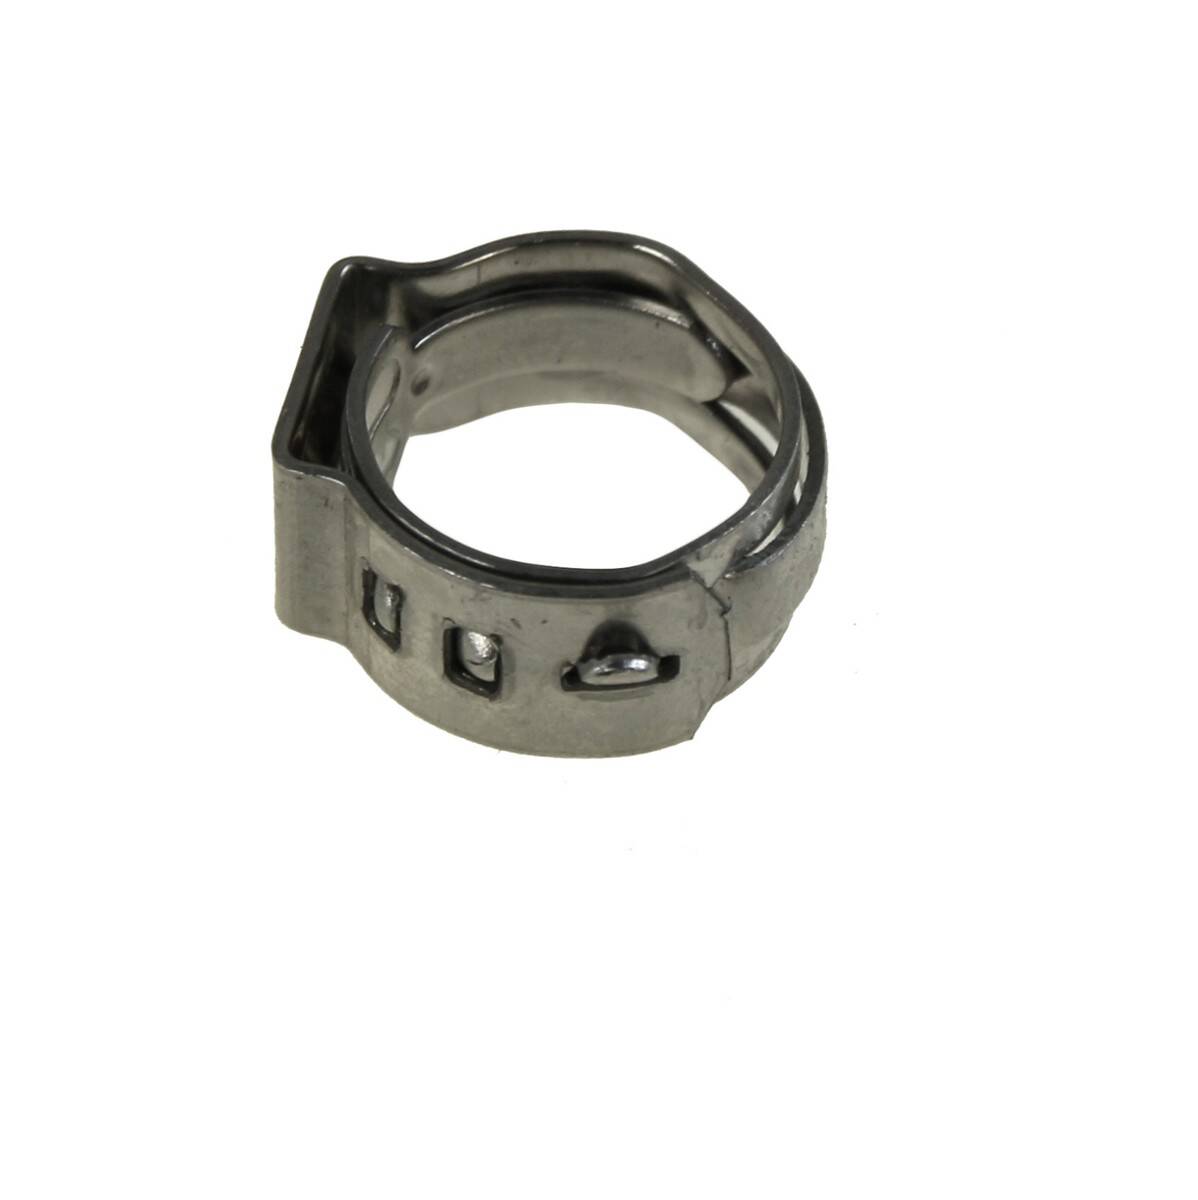 HOSE CLAMP 9.4-11.9 mm 7-0.6 STAINLESS STEEL